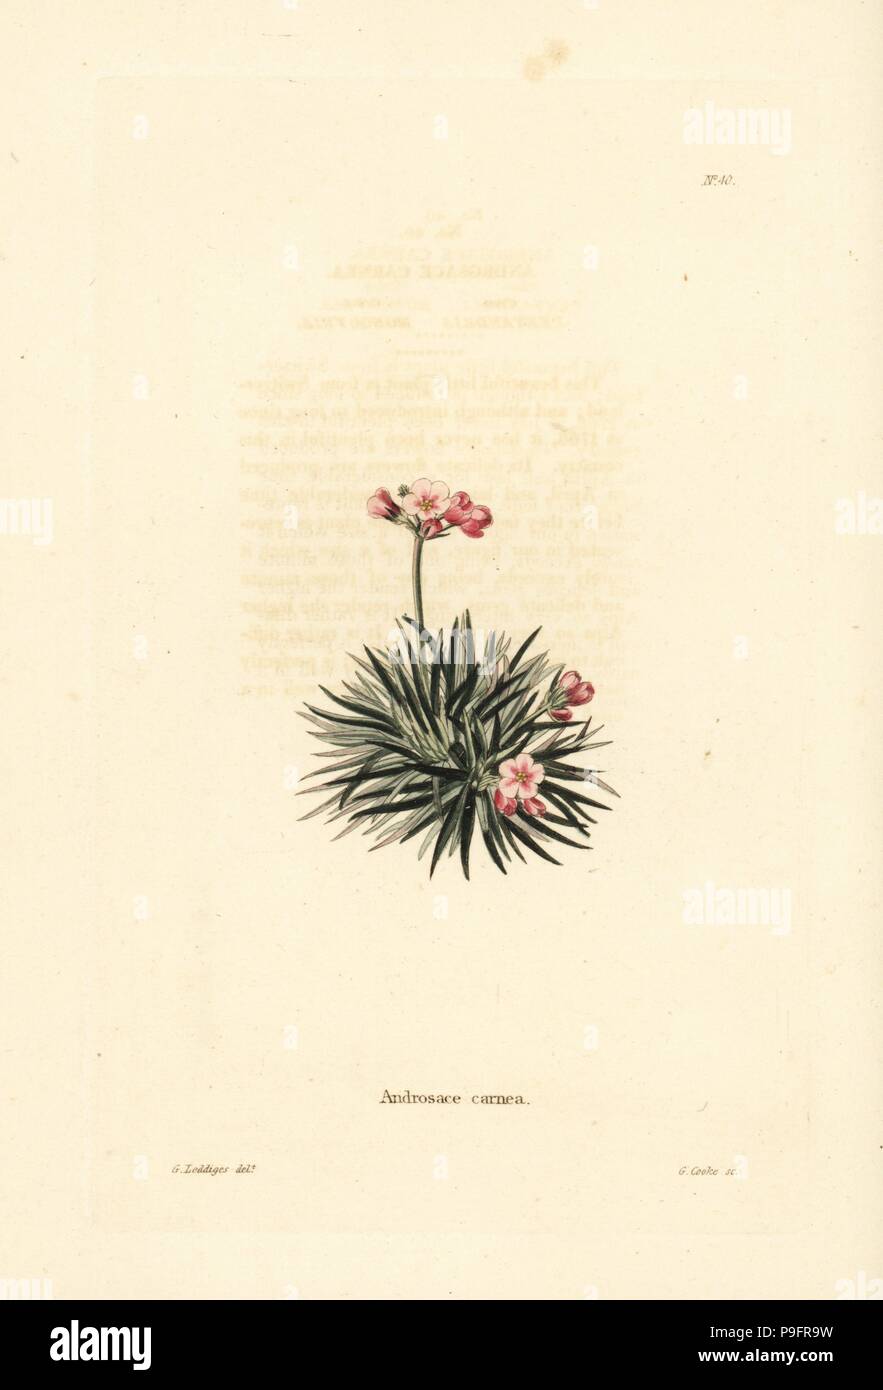 Rock jasmine, Androsace laggeri (Androsace carnea). Handcoloured copperplate engraving by George Cooke after George Loddiges from Conrad Loddiges' Botanical Cabinet, Hackney, 1817. Stock Photo